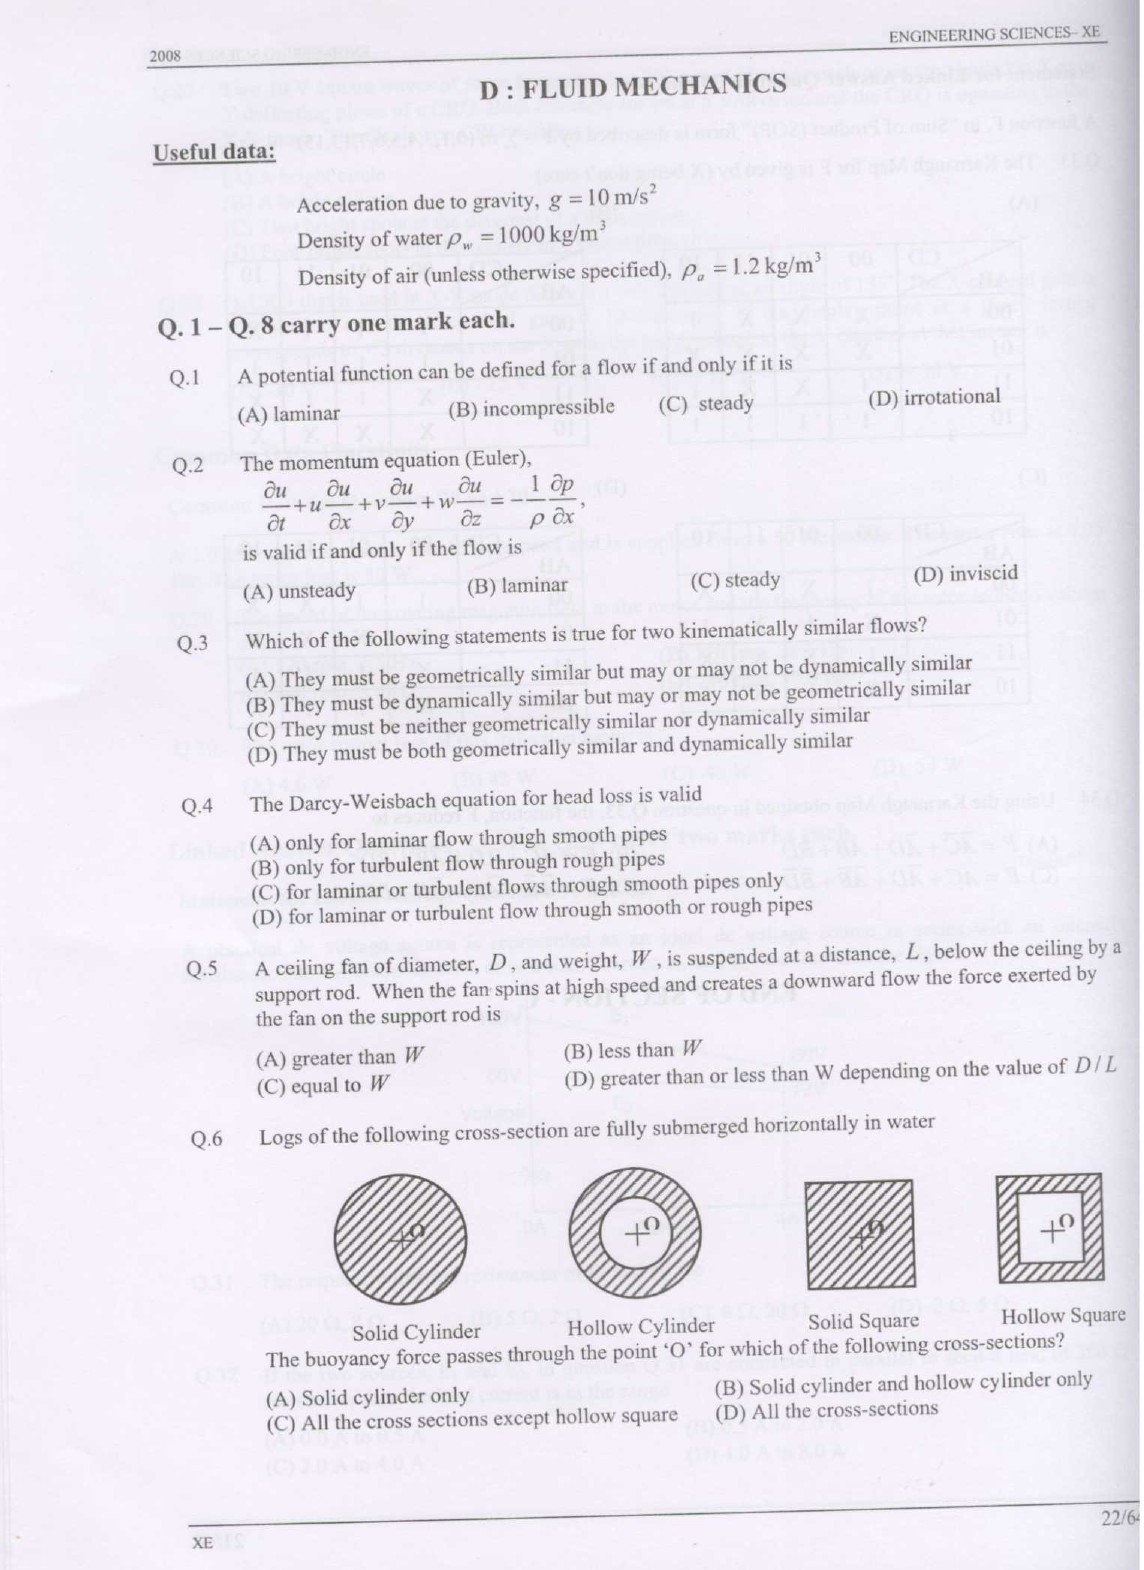 GATE Exam Question Paper 2008 Engineering Sciences 22